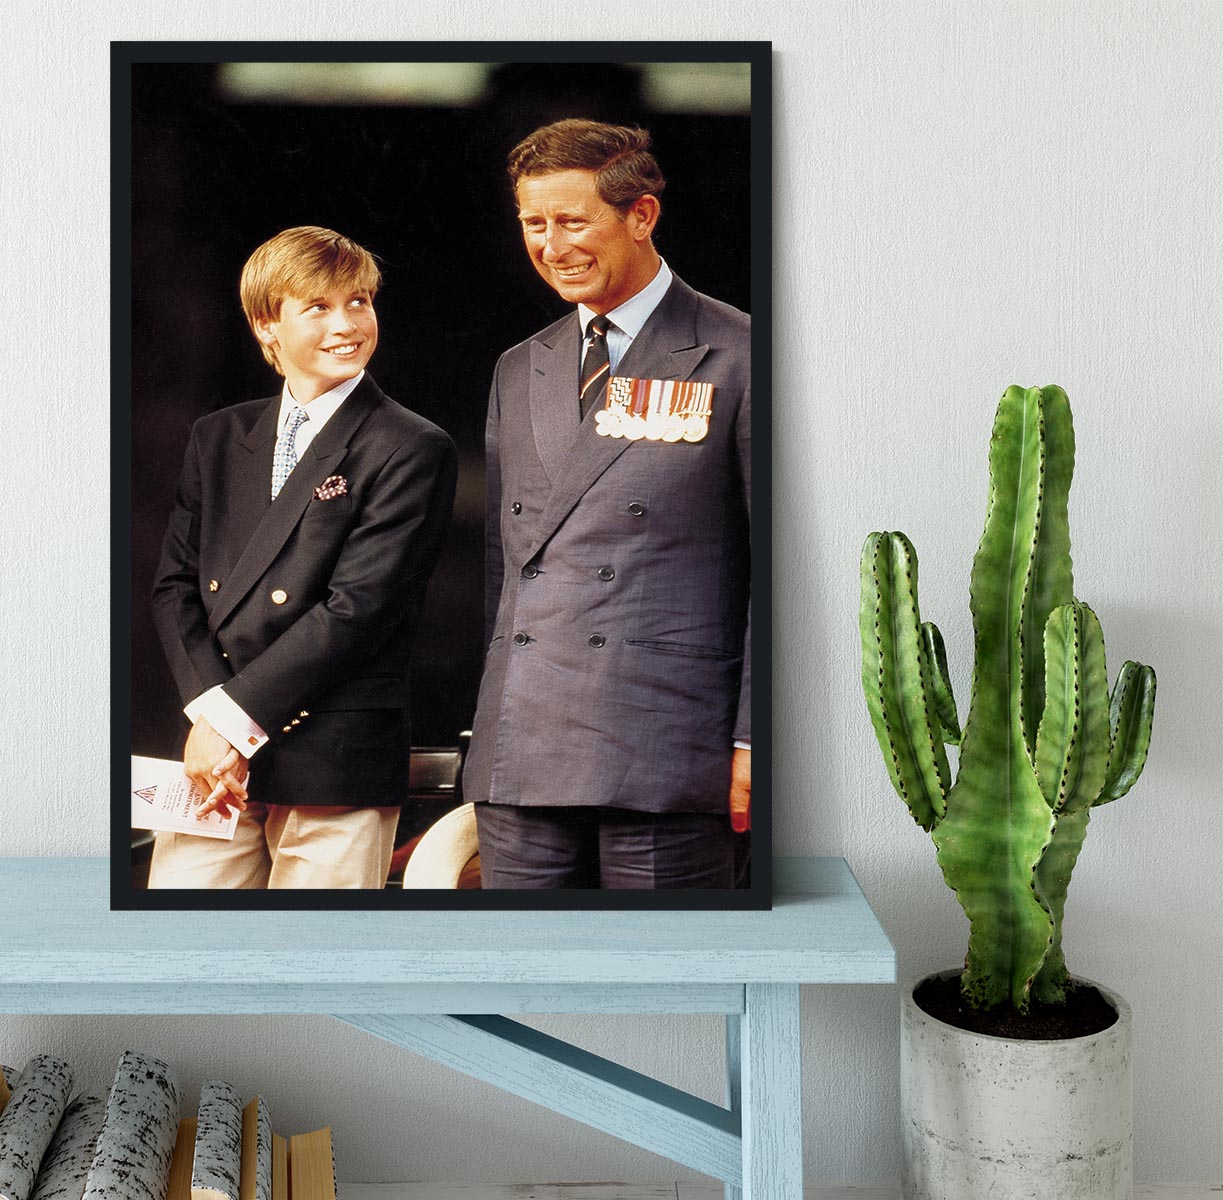 Prince William with Prince Charles at a VJ Parade Framed Print - Canvas Art Rocks - 2